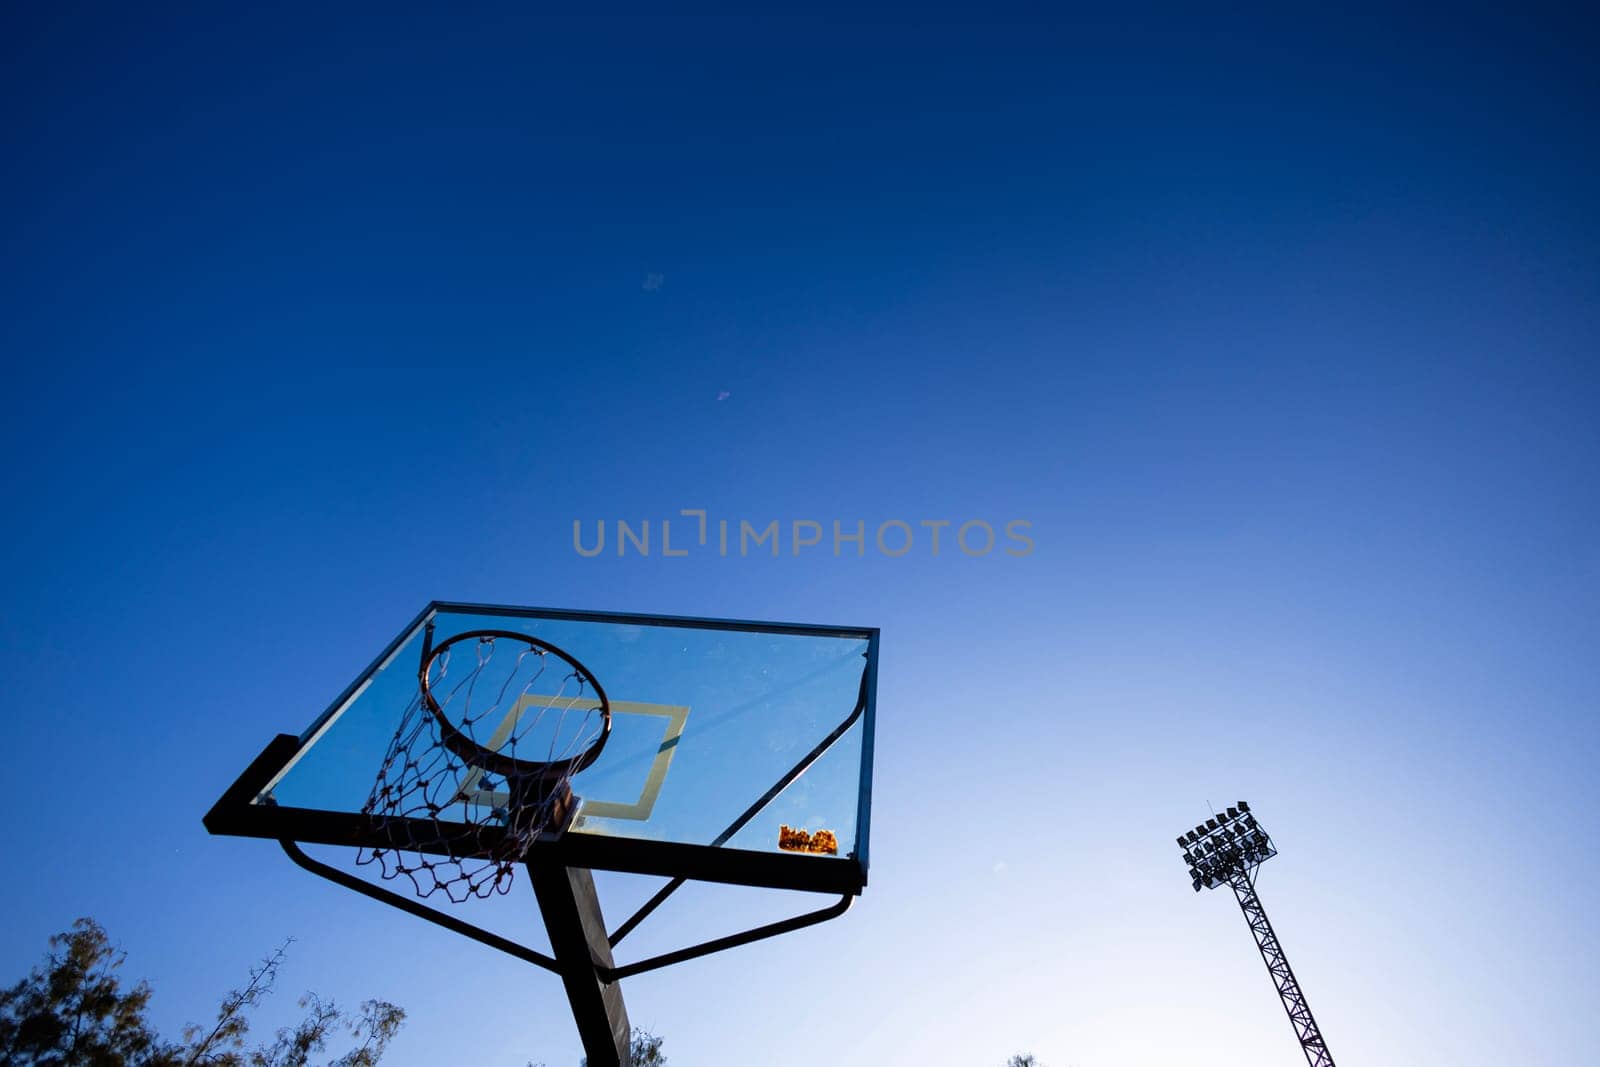 Basketball hoop in the public arena on a blue sky background.